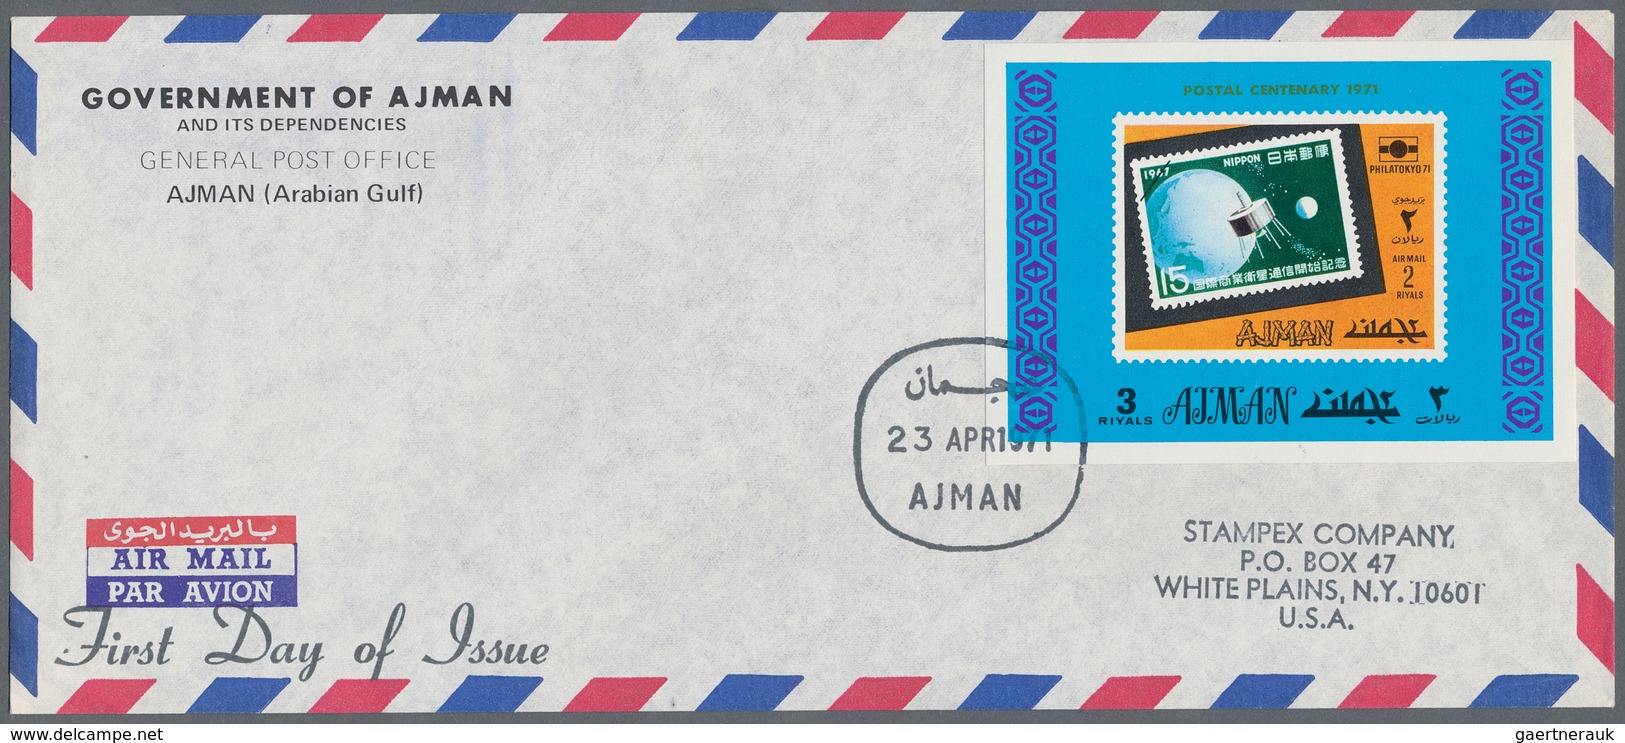 24672 Asien: 1965/1971, GULF STATES (Ajman, Dubai, Fujeira), group of eight (mainly registered) airmail co